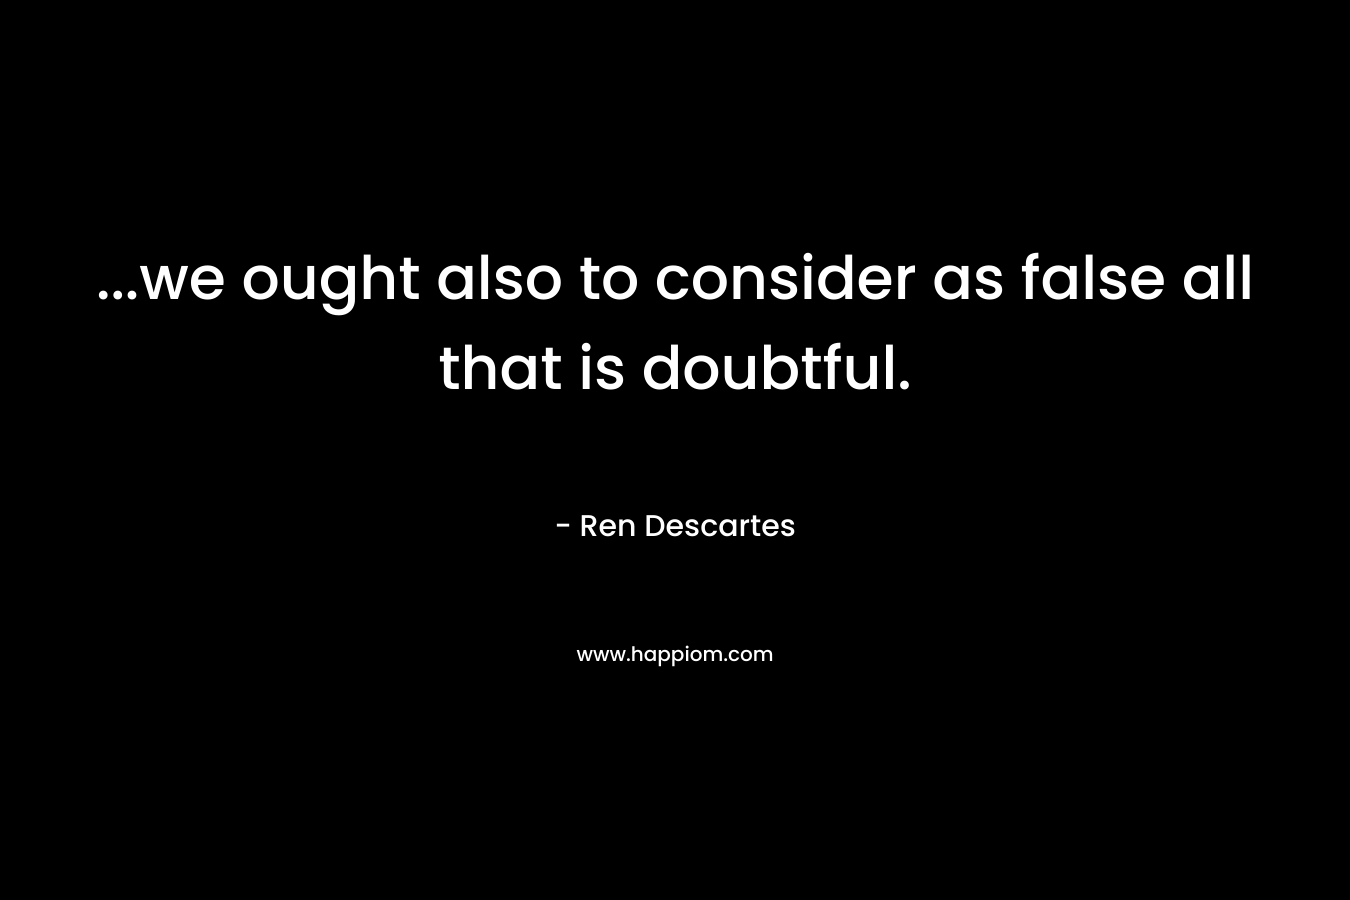 …we ought also to consider as false all that is doubtful. – Ren Descartes